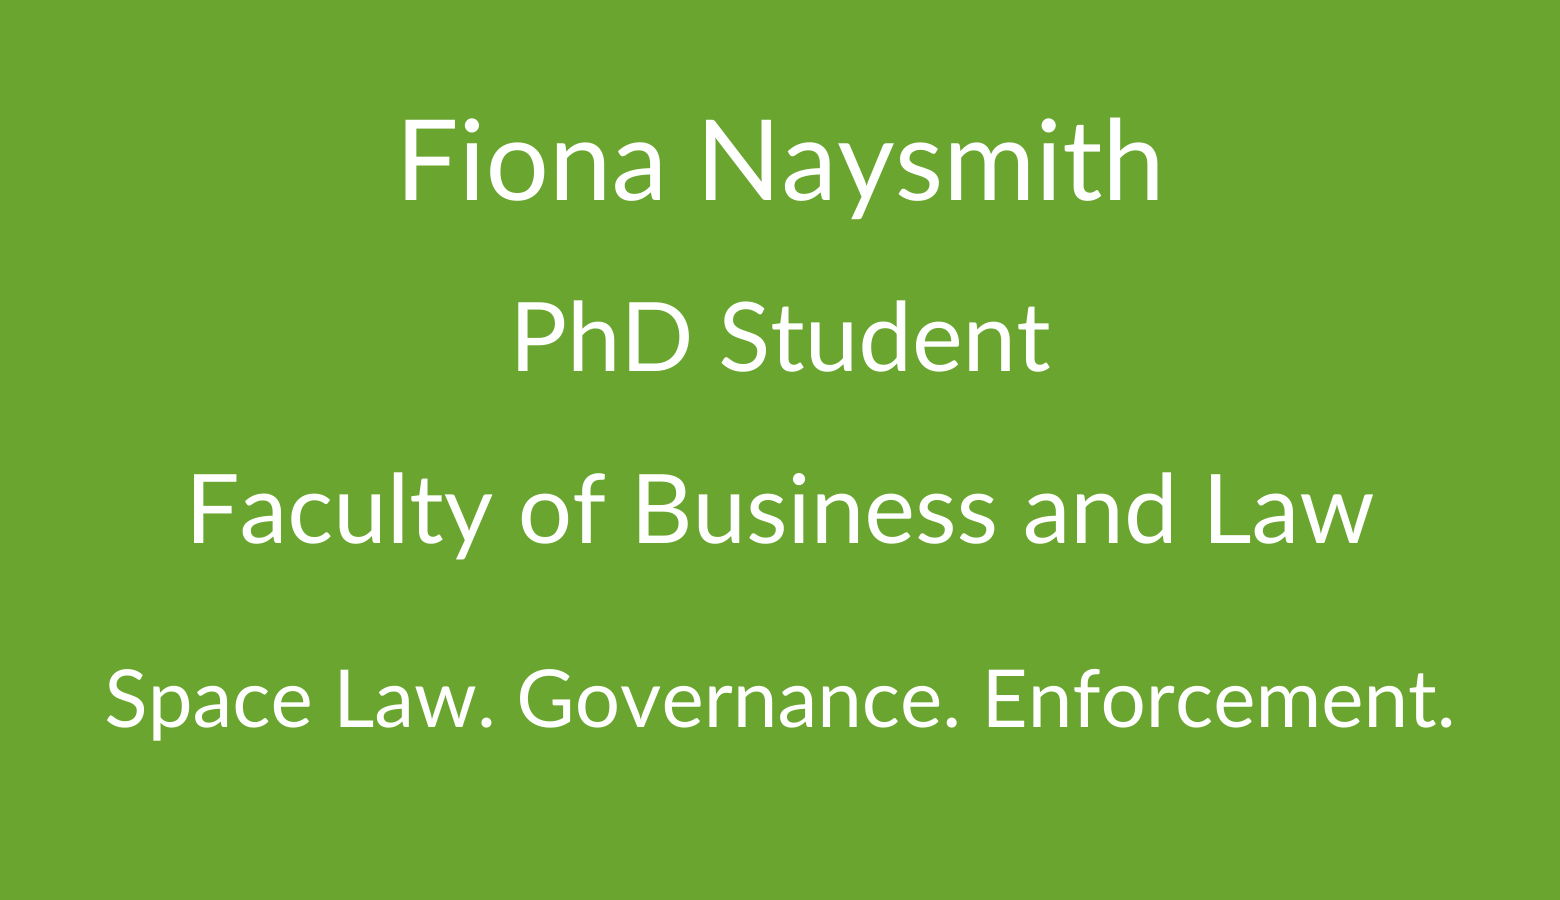 Fiona Naysmith. PhD Student. Faculty of Business and Law. Space Law. Governance. Enforcement.